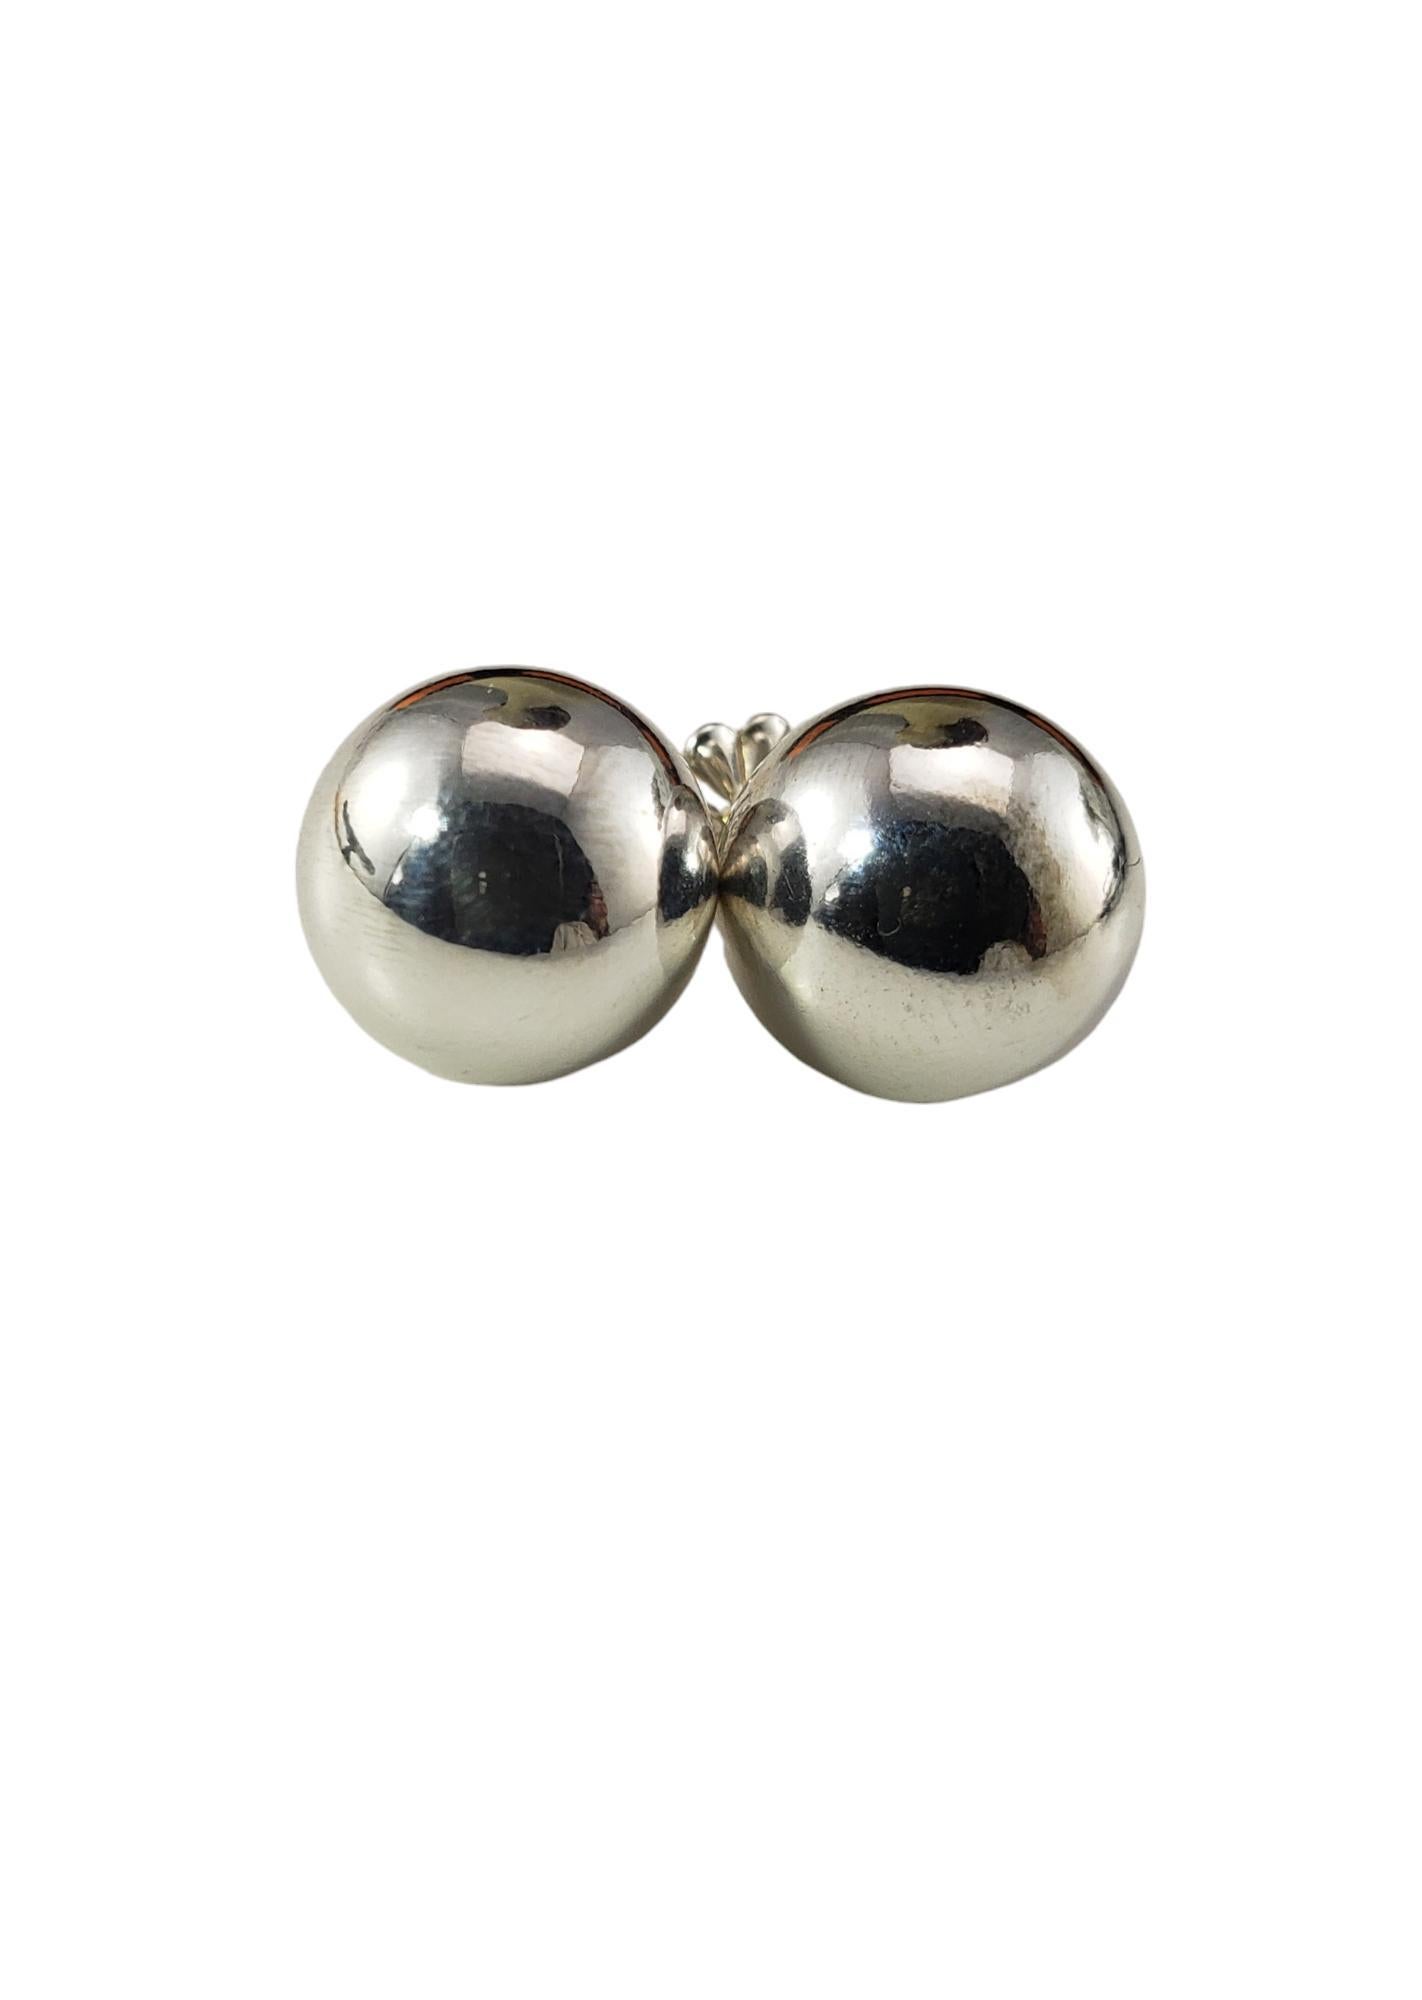 Tiffany & Co. Sterling Silver Ball Earrings

These elegant ball earrings by Tiffany & Co. are crafted in classic sterling silver.  

Width: 10 mm.  Push back closures.

Matching bracelet: #17162
Matching necklace: #17161

Size: 10 mm

Hallmark: 